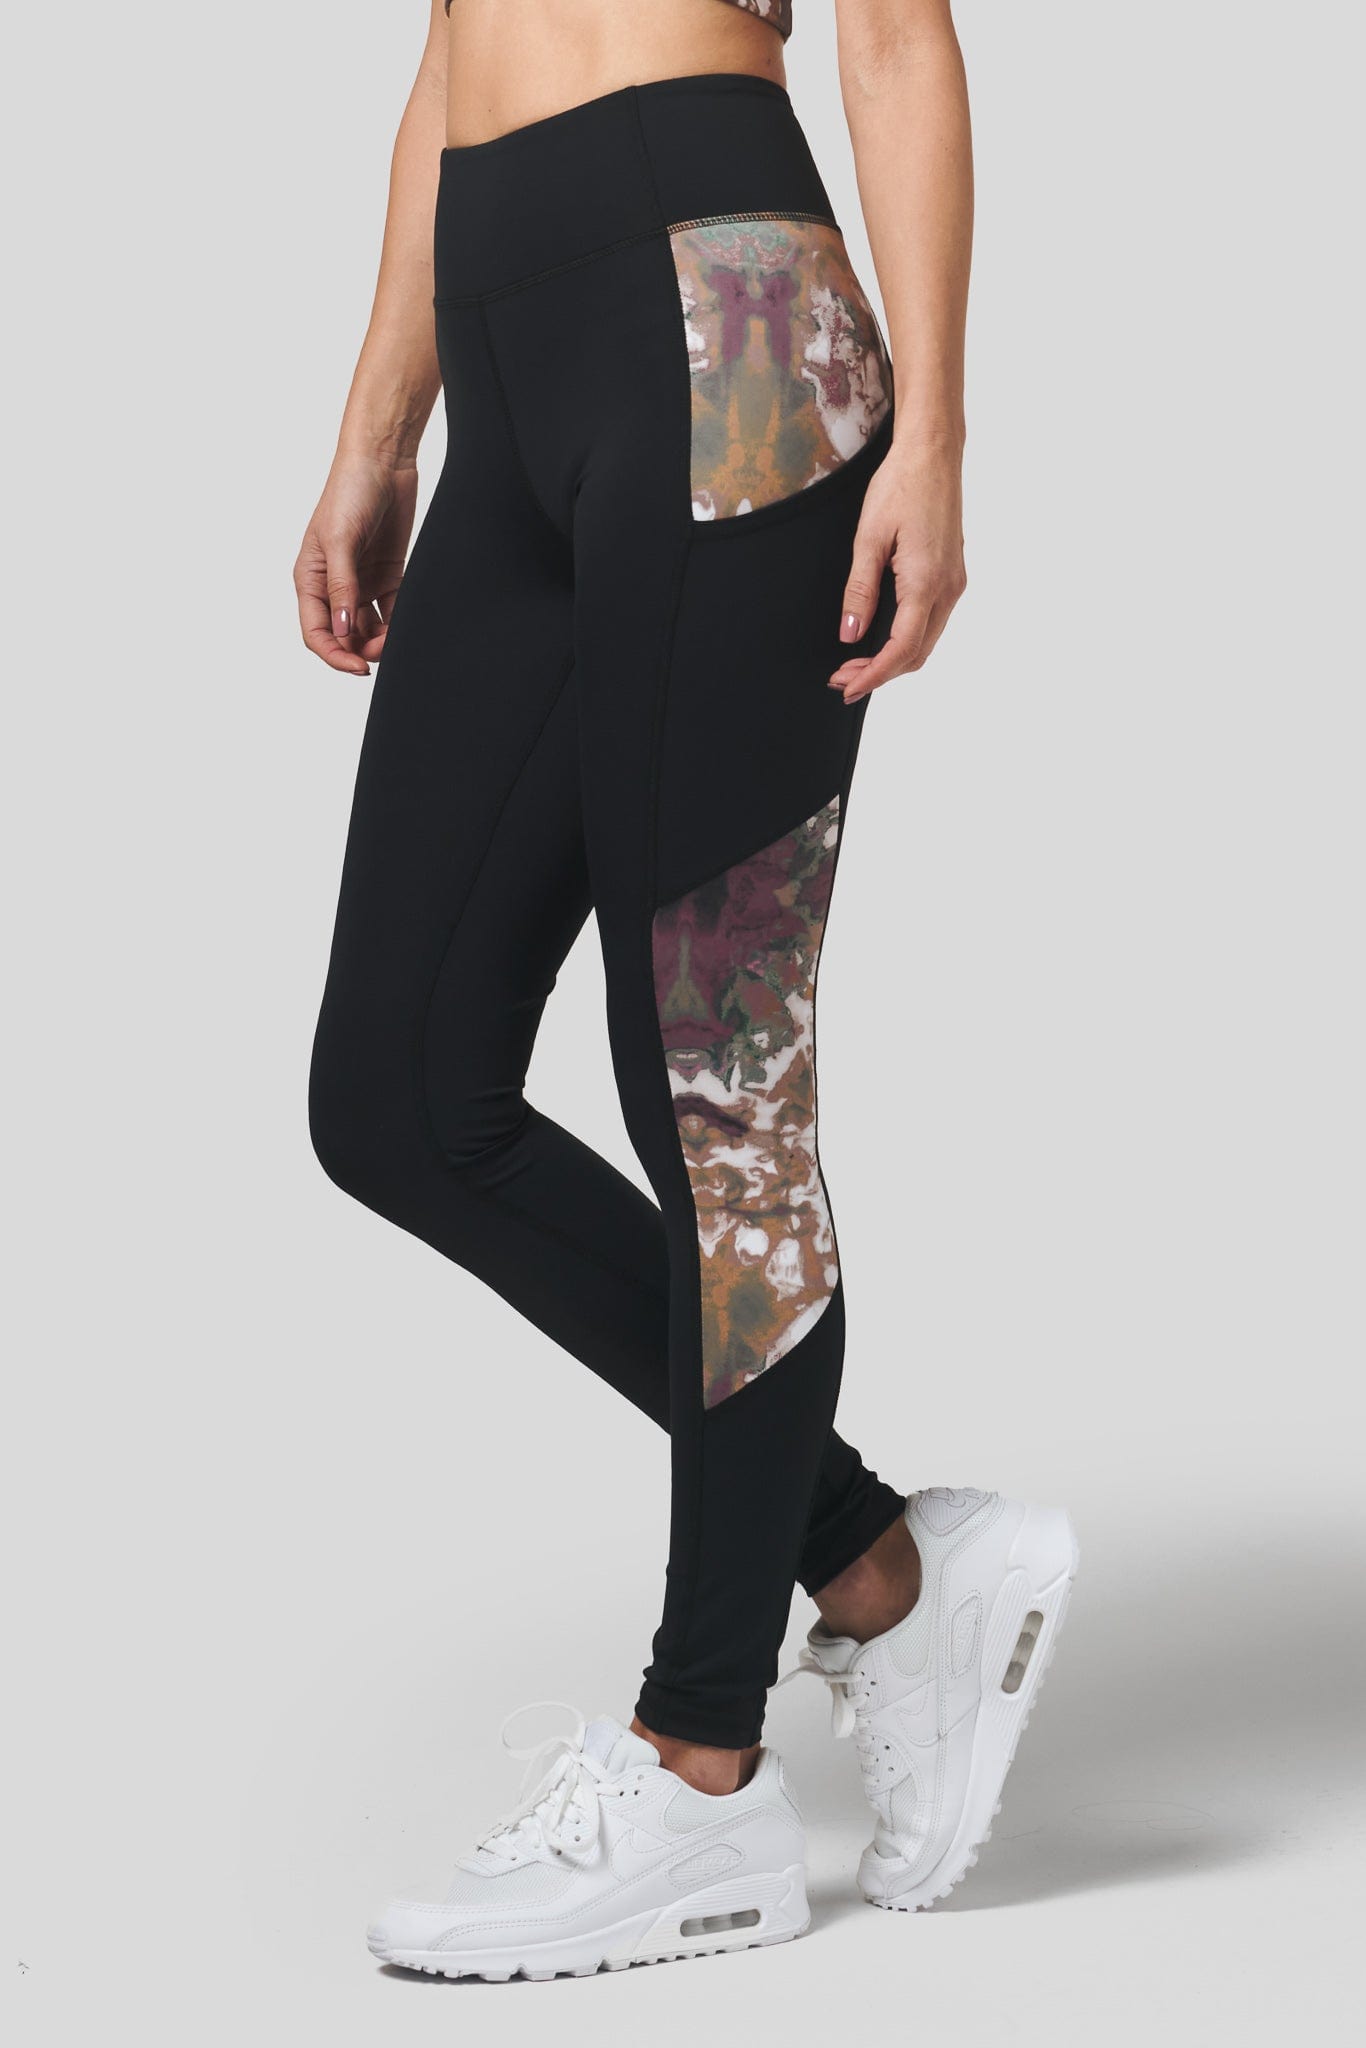 A woman with white Nike Air Max sneakers wears a pair of DAUB pocket leggings in black with a side panel in earthy tie-dye.